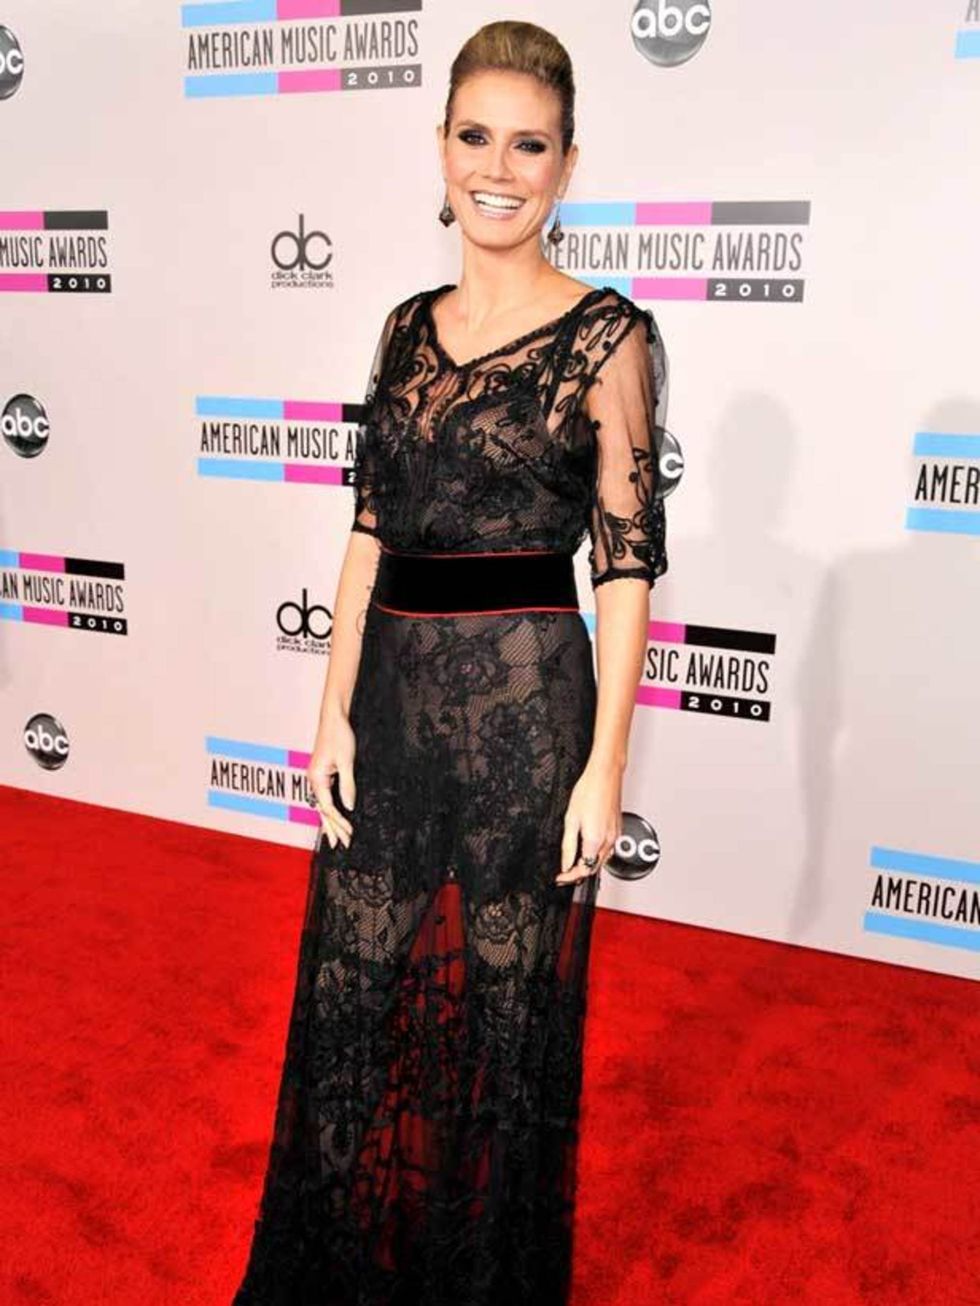 <p><a href="http://www.elleuk.com/starstyle/style-files/%28section%29/heidi-klum/%28offset%29/0/%28img%29/679105">Heidi Klum</a> stands out in sheer lace at the American Music Awards in Los Angeles, 21 November 2010</p>